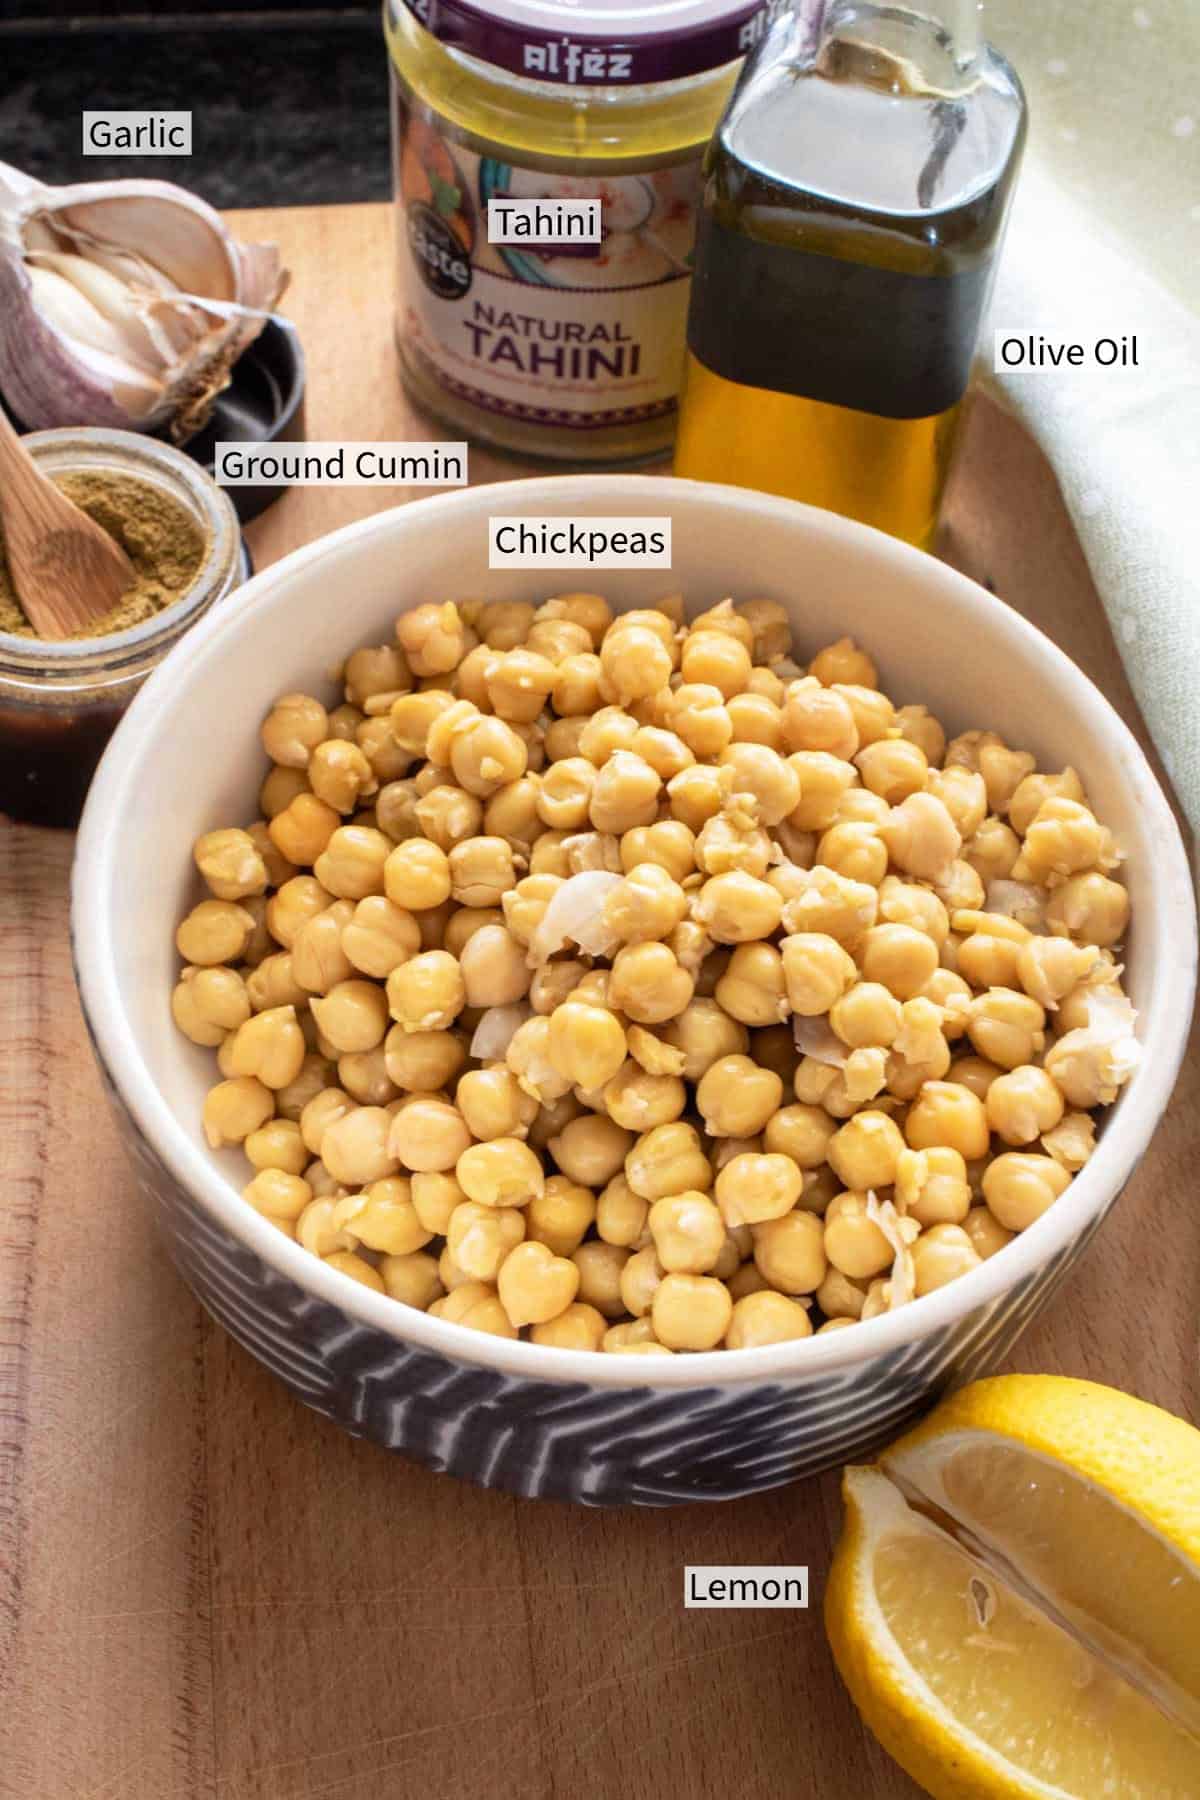 Ingredients for hummus on a wooden surface: a bowl of chickpeas, a bottle of olive oil, a jar of tahini, a sliced lemon, garlic, and ground cumin.